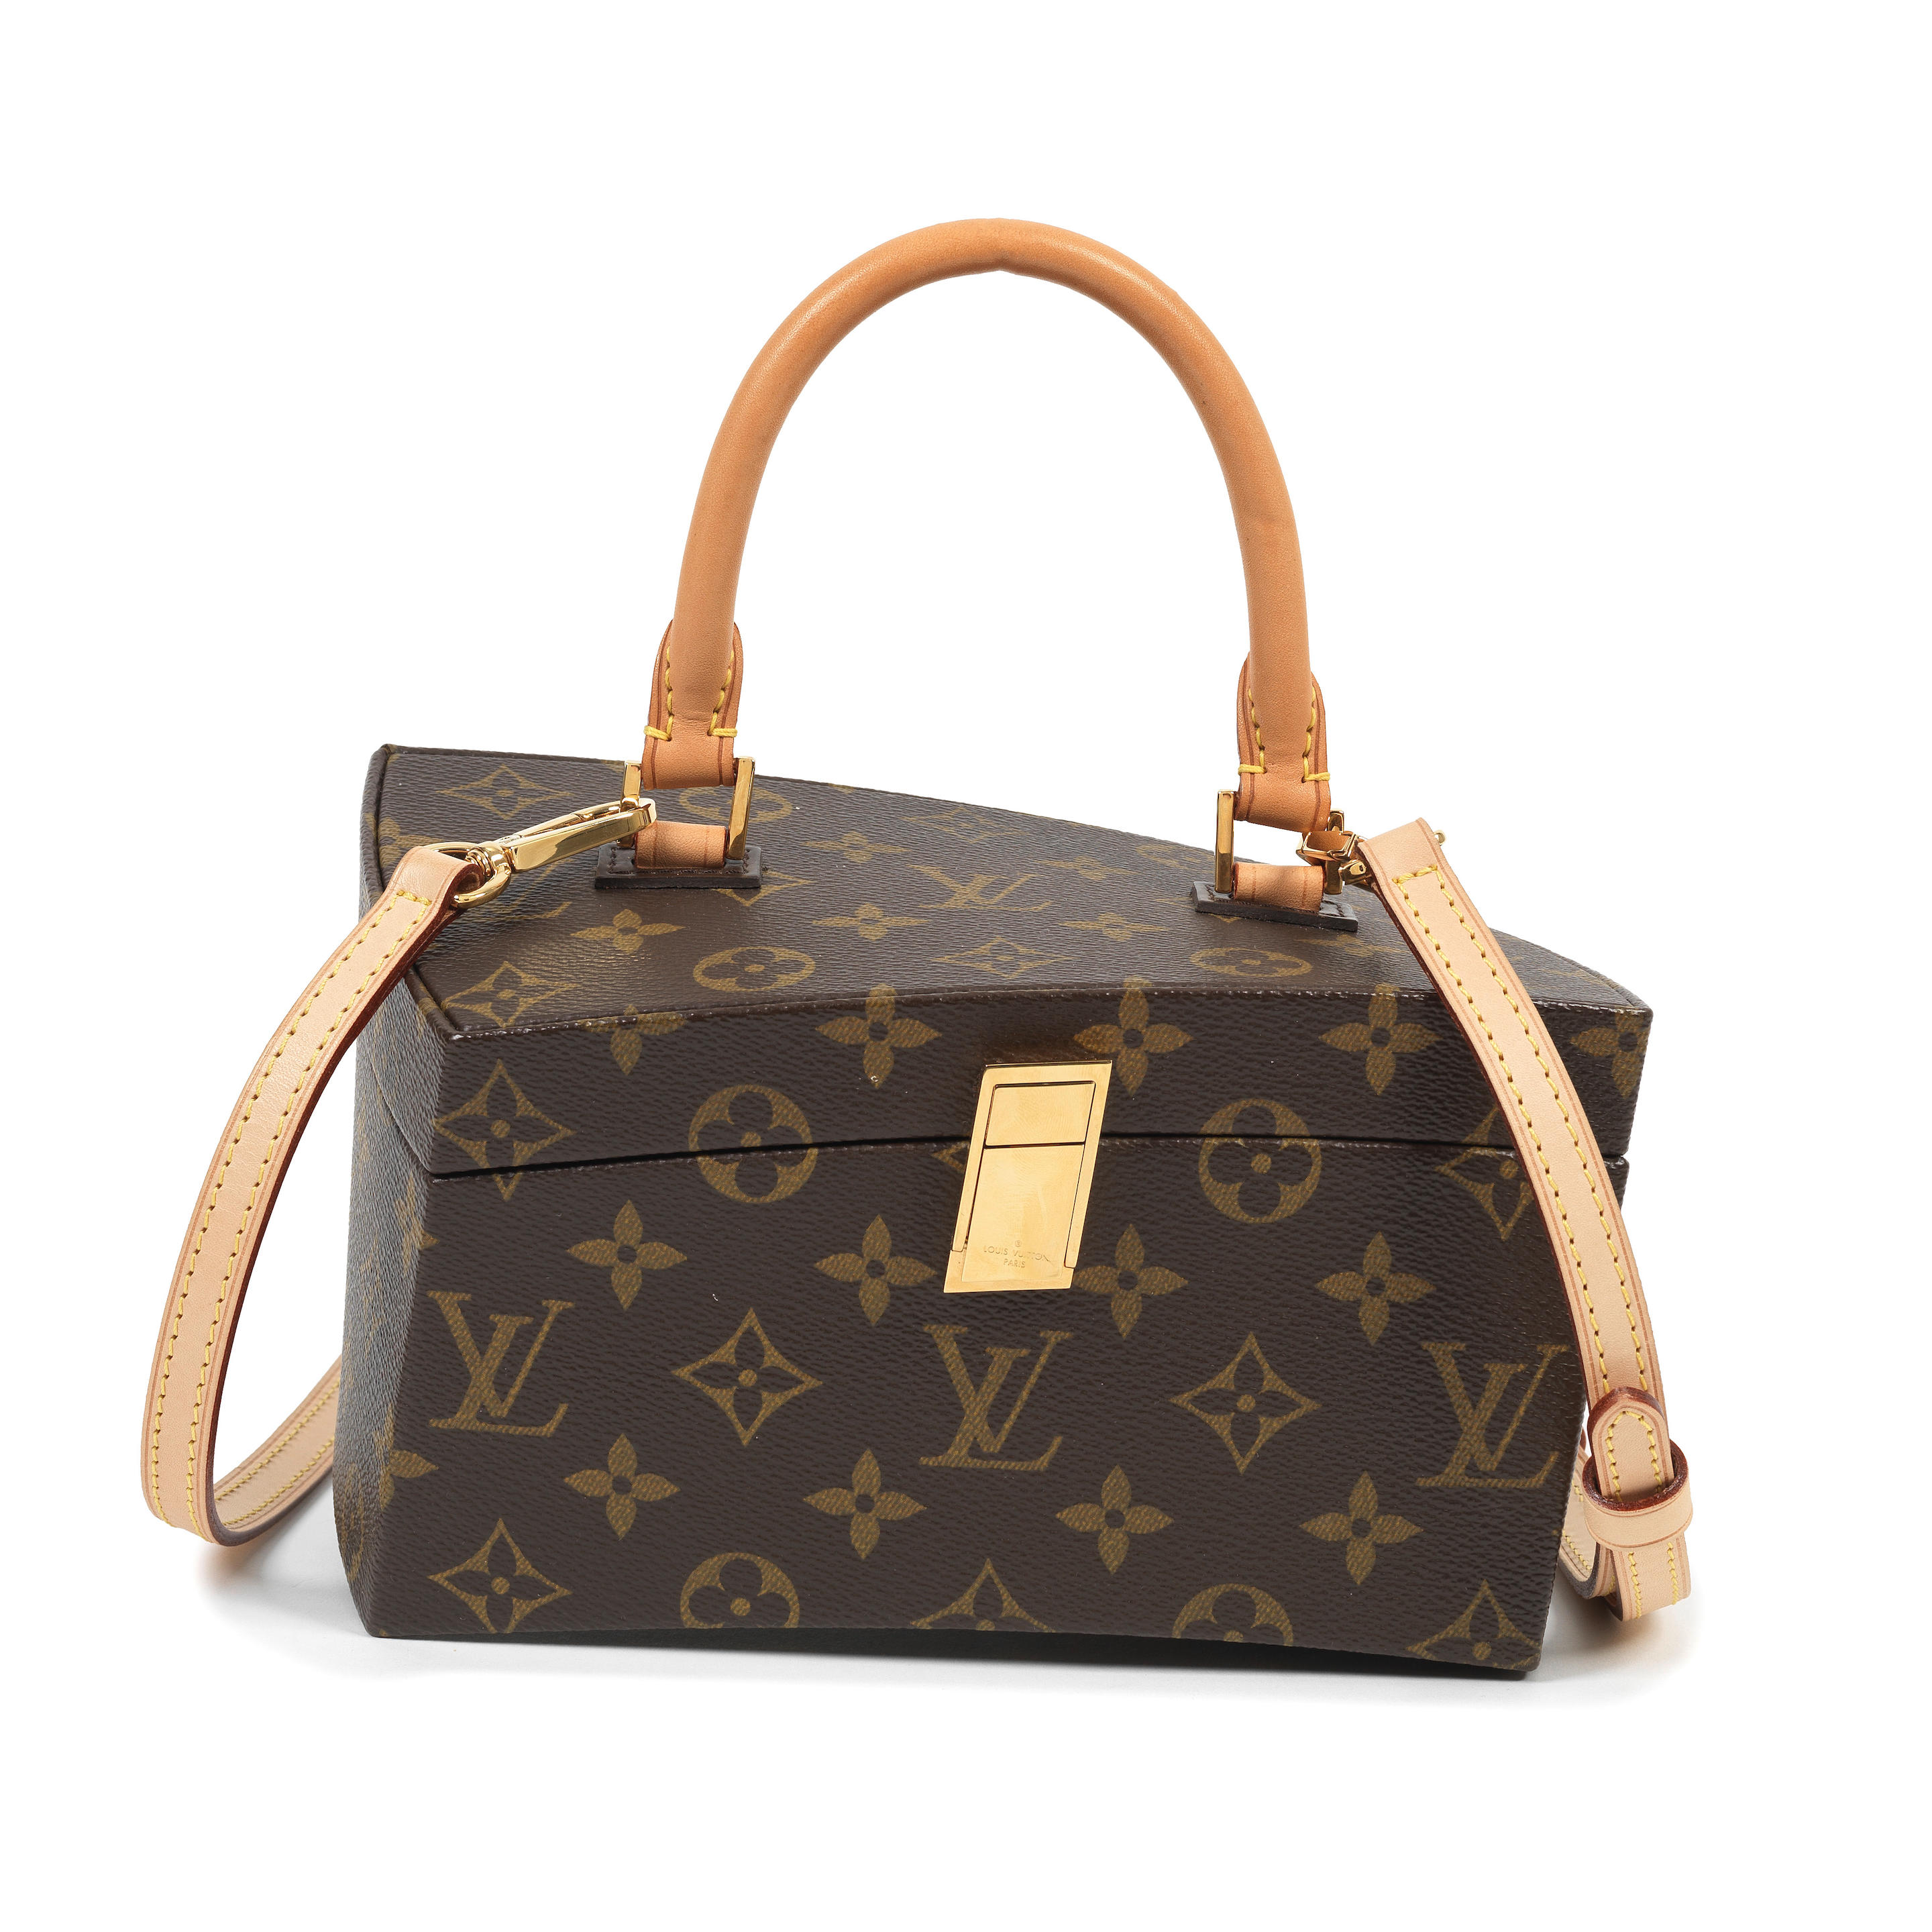 Louis Vuitton Iconoclasts Frank Gehry Twisted Box Handbag